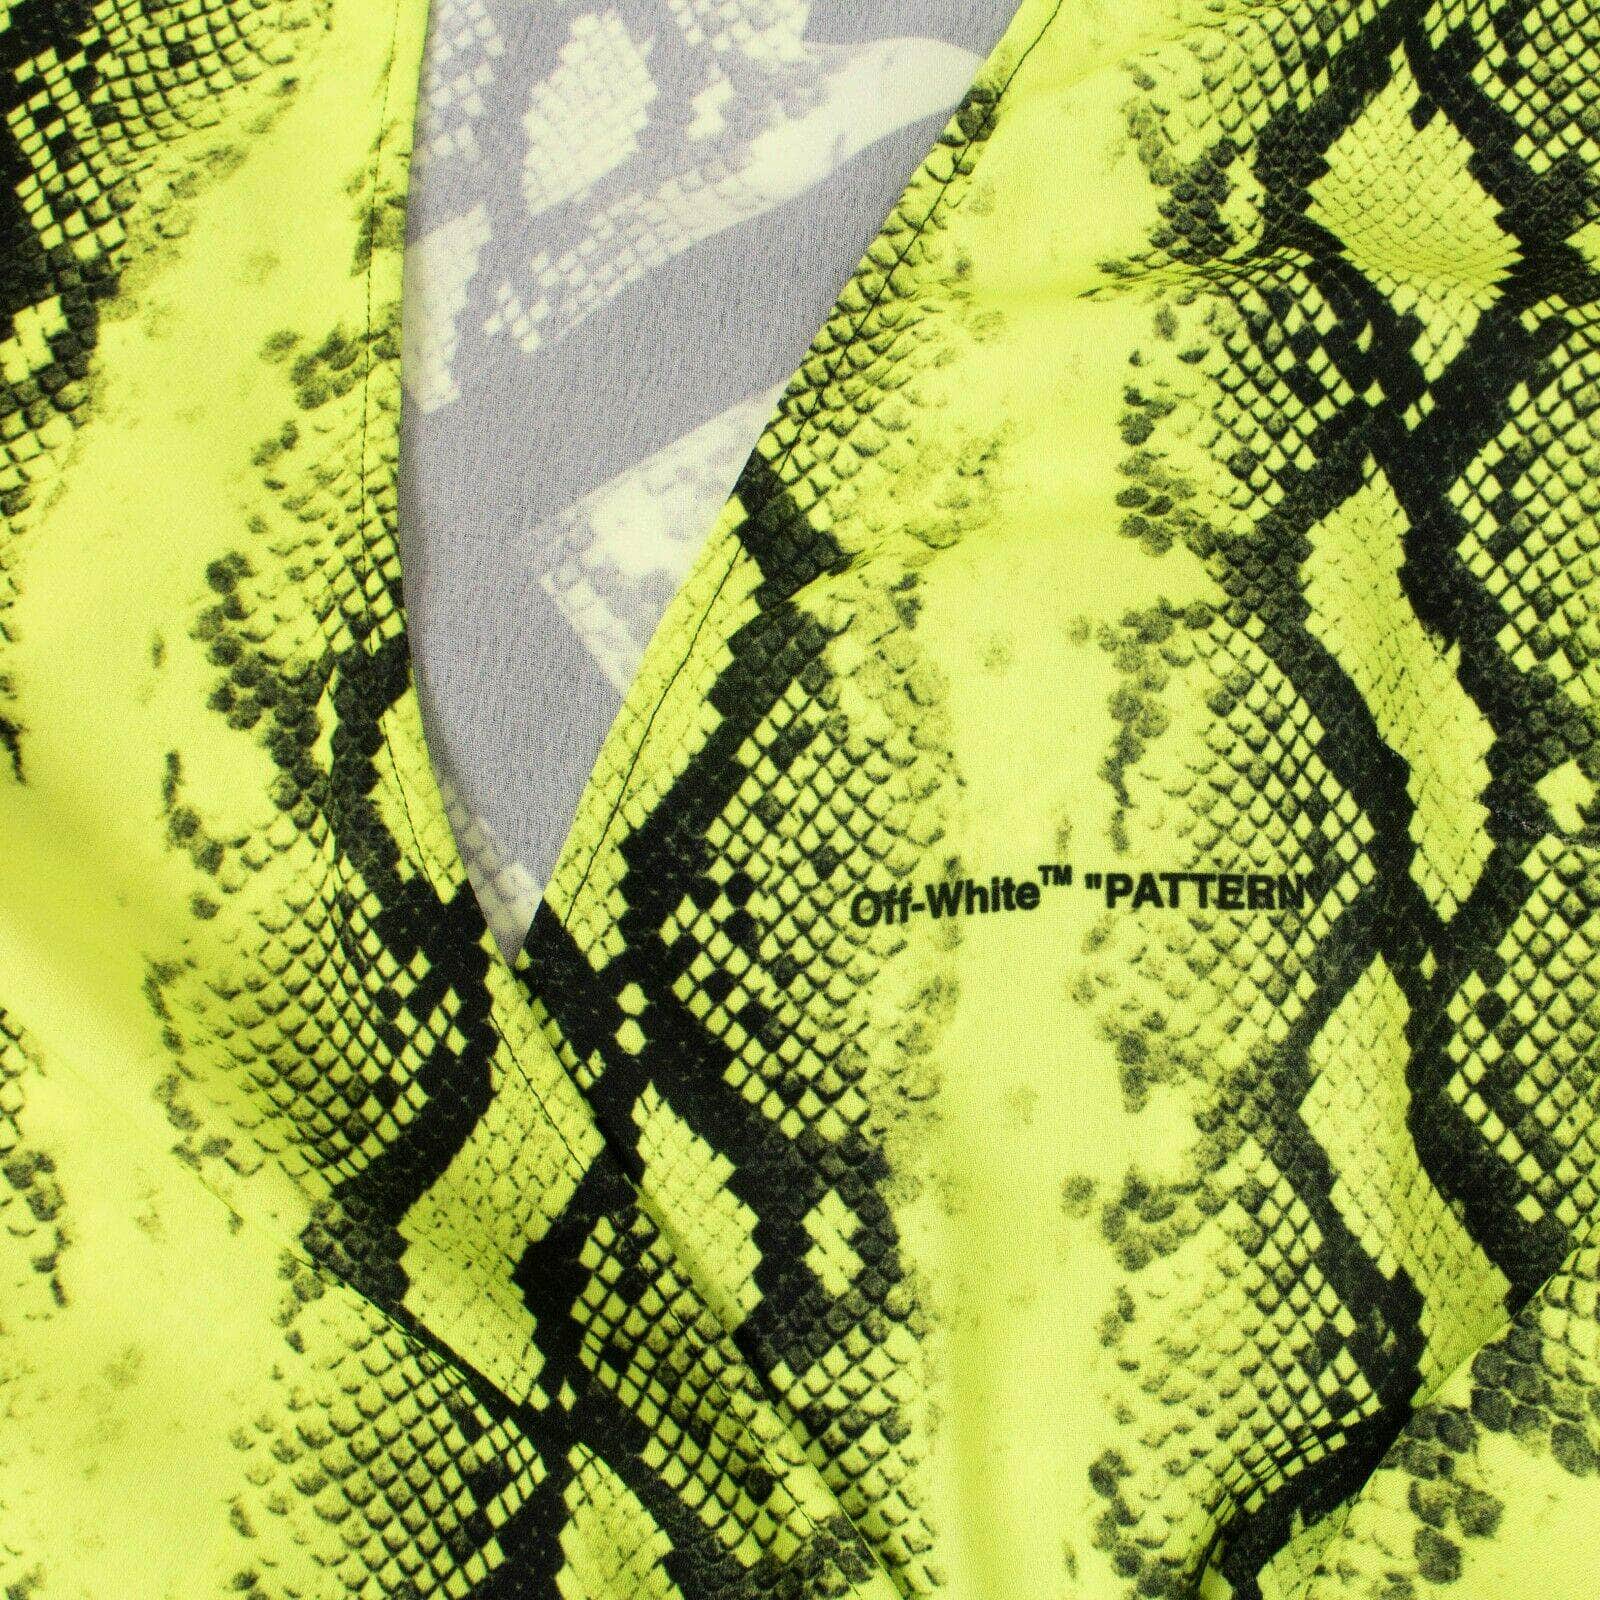 OFF-WHITE c/o VIRGIL ABLOH channelenable-all, chicmi, couponcollection, gender-womens, main-clothing, owjuly4 40 Yellow Snake Print Mini Dress 82NGG-OW-265/40 82NGG-OW-265/40